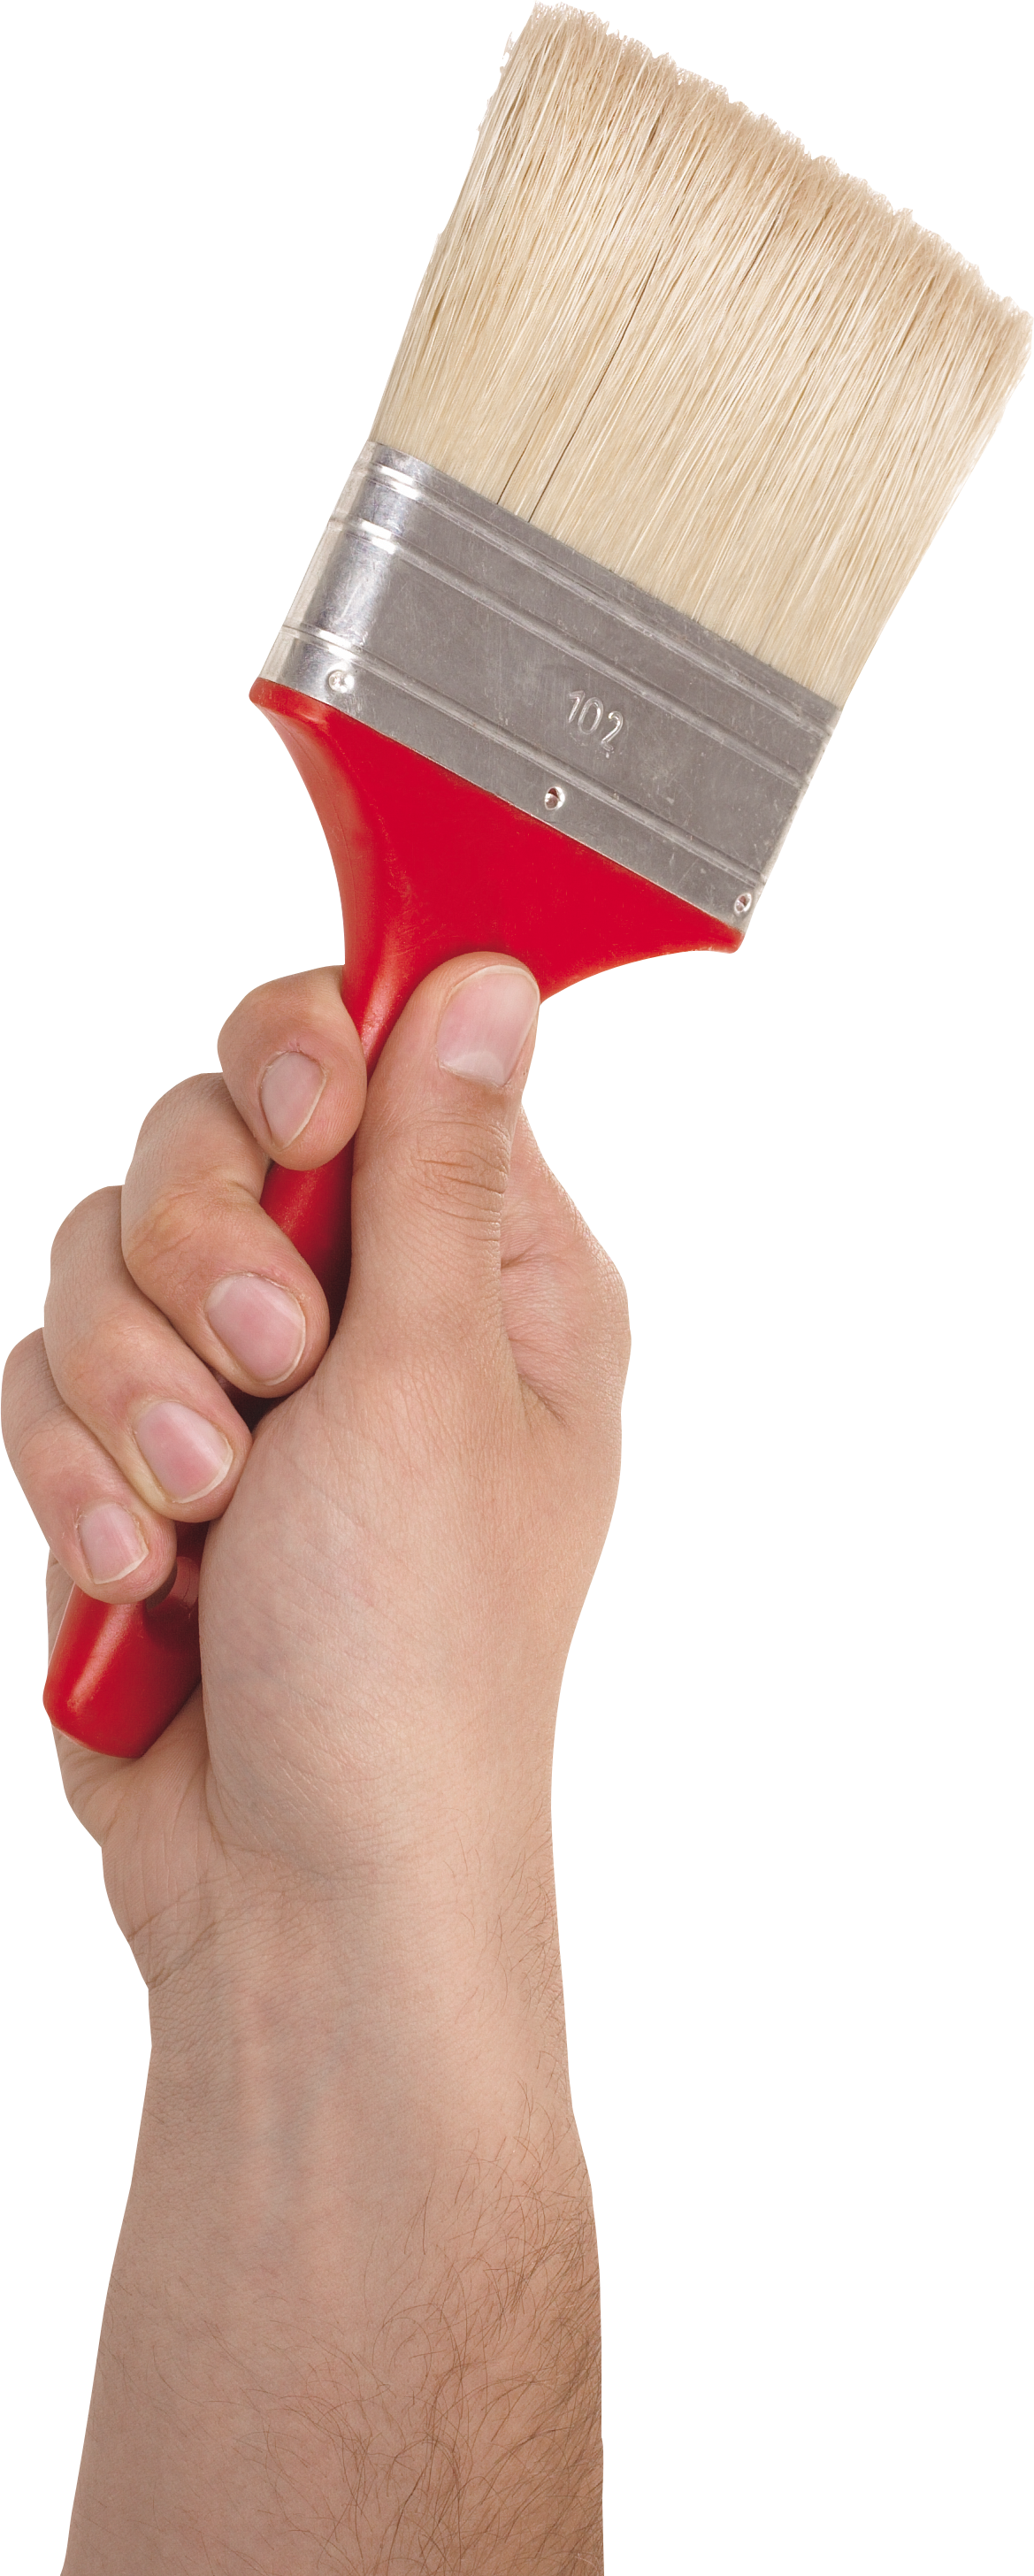 paint brush in hand PNG image transparent image download, size